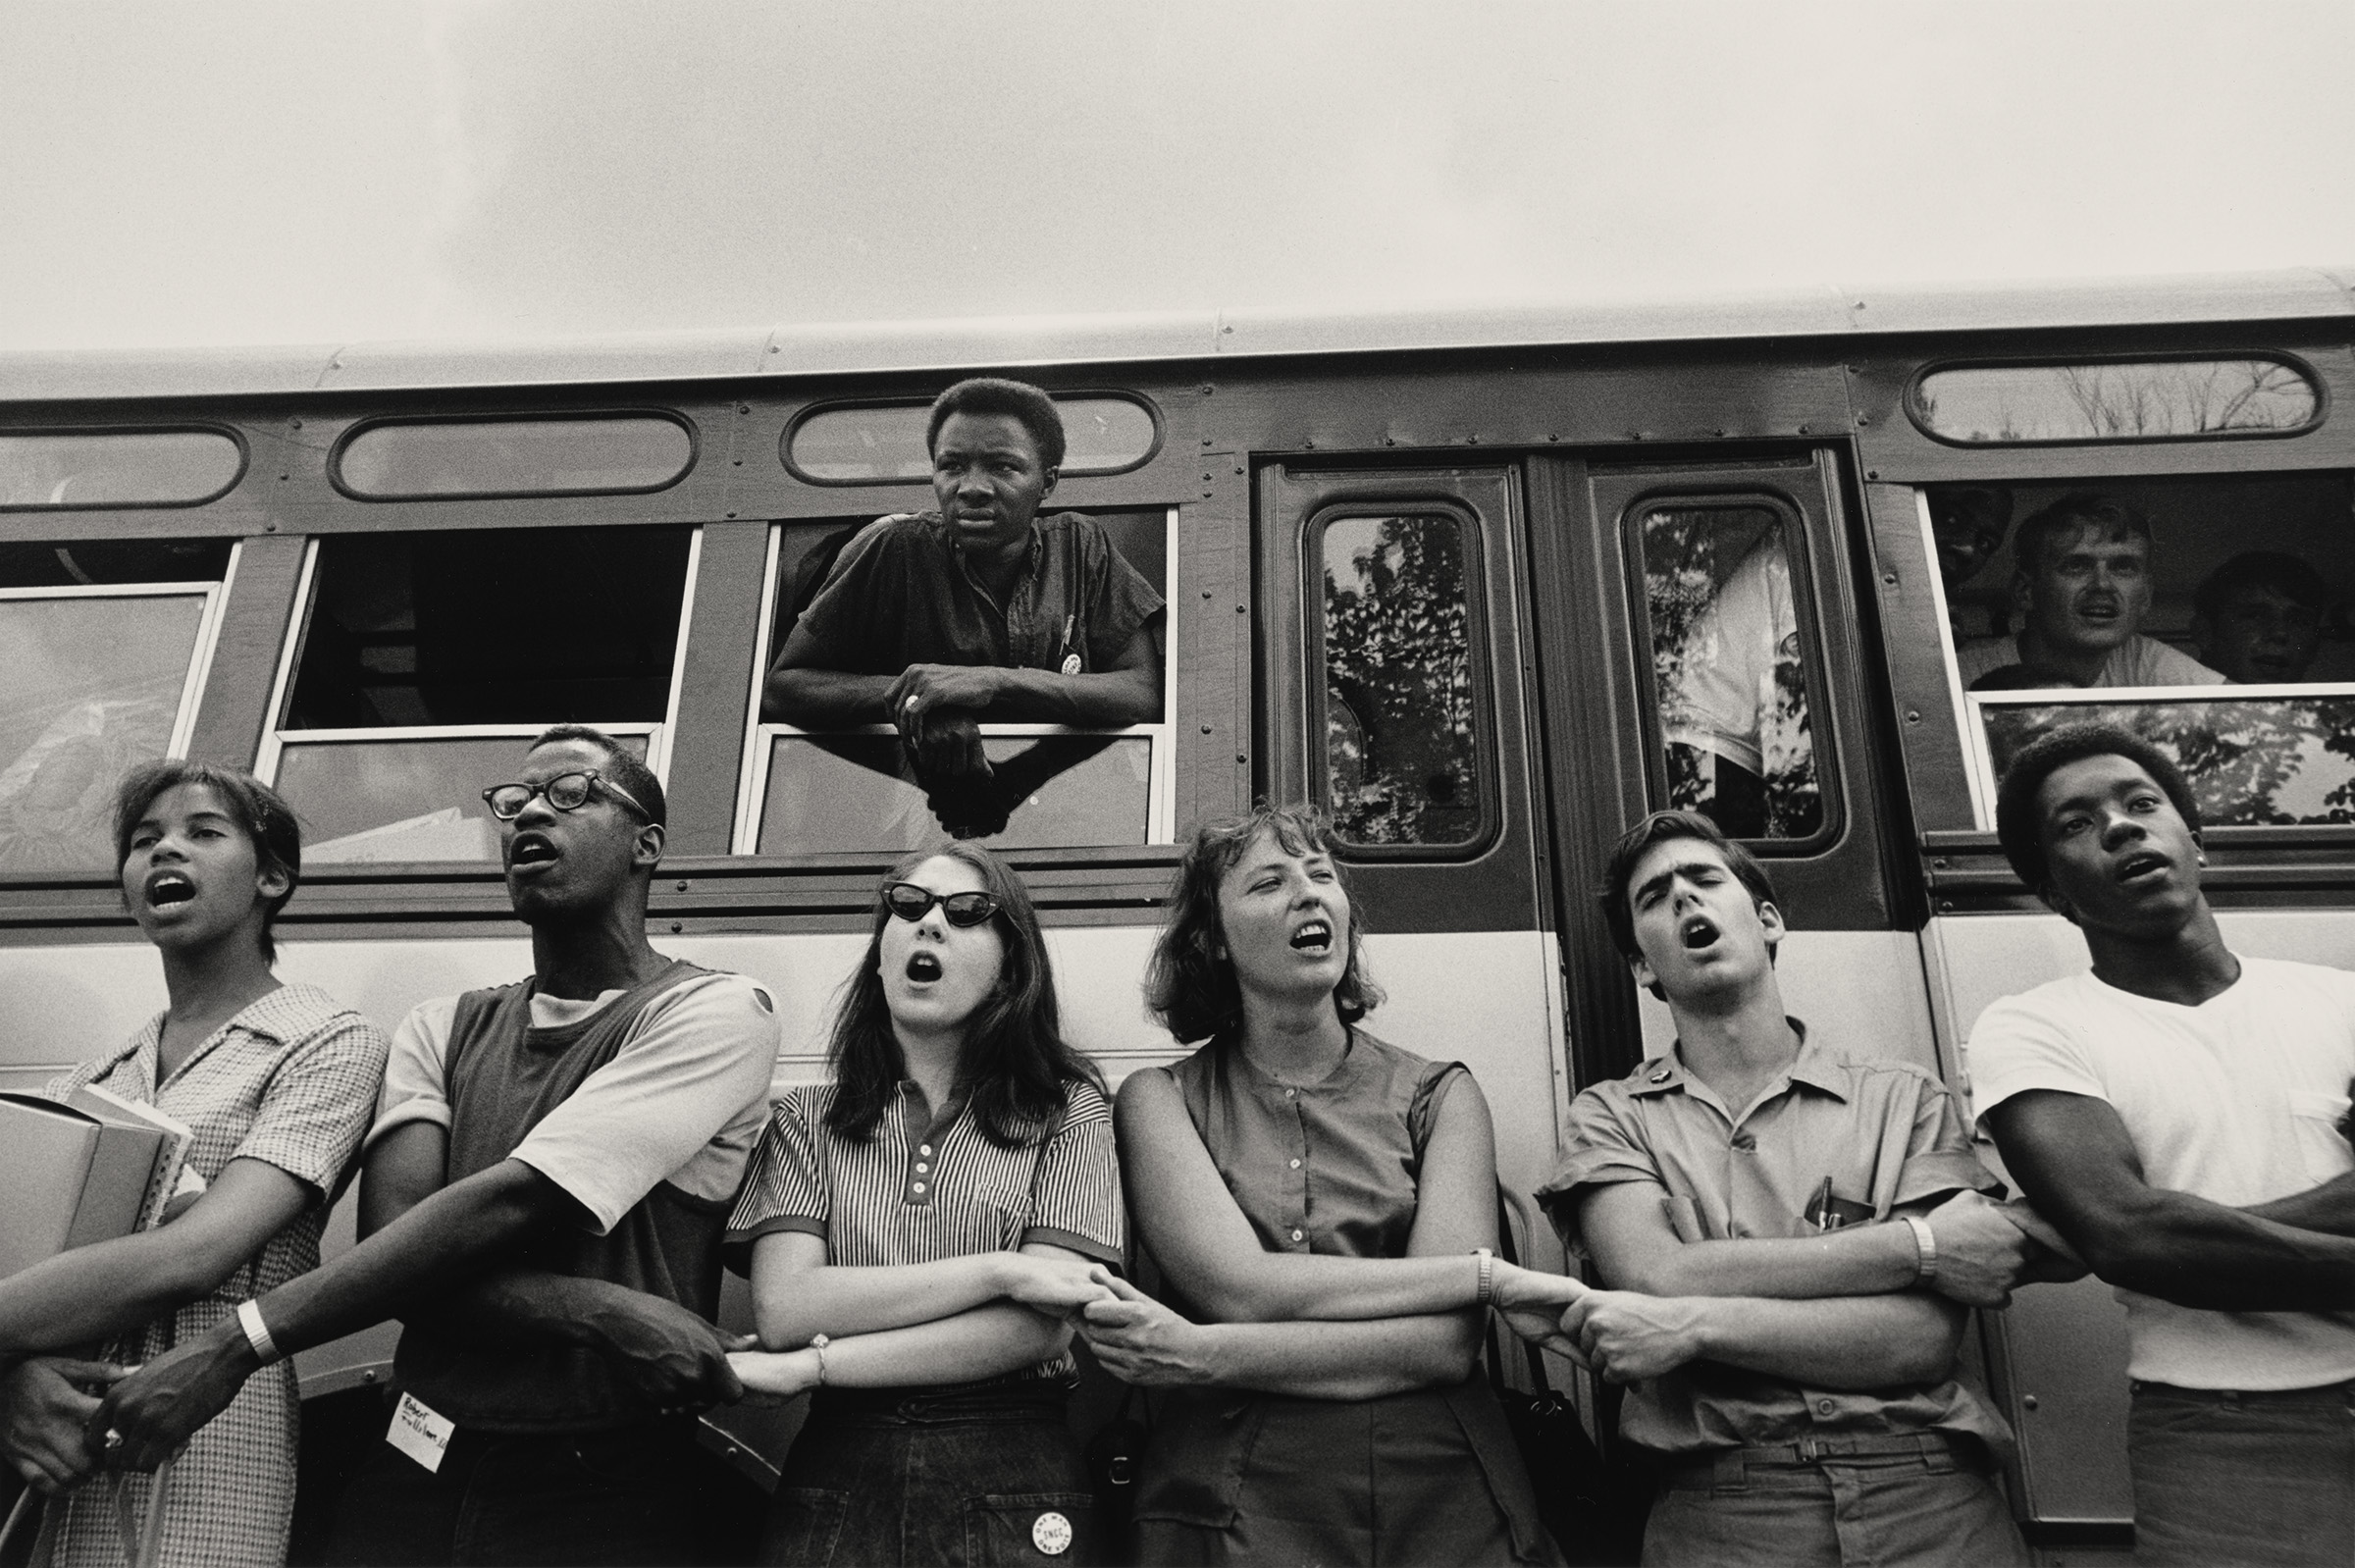 We Shall Overcome; Summer Freedom Bus, 1964. Photograph by Steve Schapiro. Freedom Summer volunteers form a chain with their arms while singing 'We Shall Overcome' before they get on the bus to Mississippi. Photograph in the collection of Miami University Art Museum, Oxford Ohio. Partial gift of the artist and partial purchase with contributions from the Kezur Endowment Fund (2019.23.1).